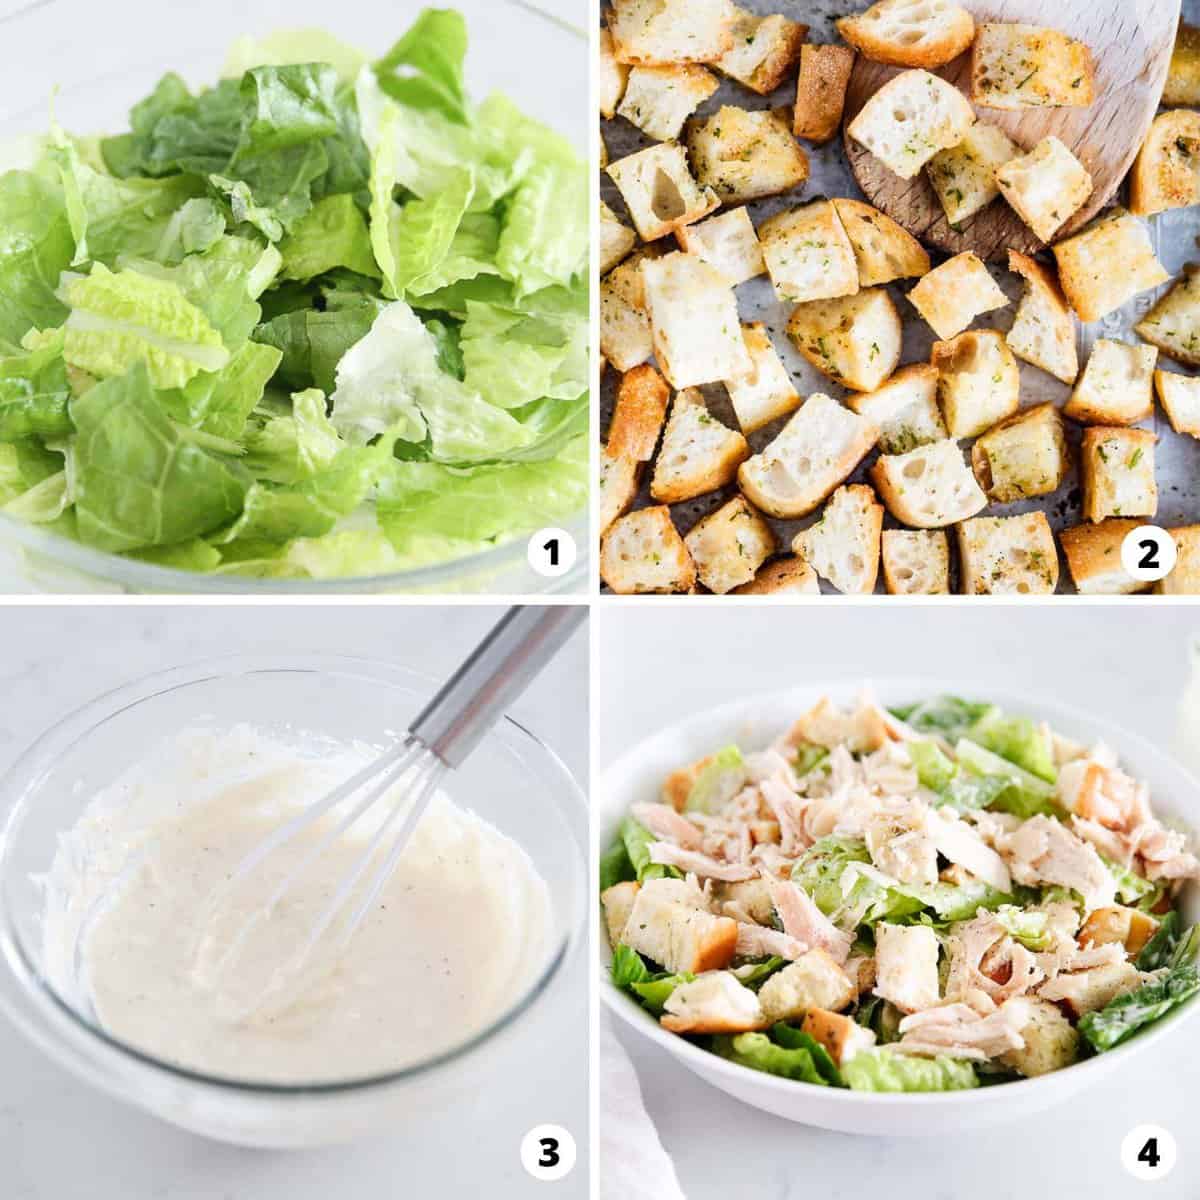 Showing how to make chicken caesar salad in a 4 step collage. 